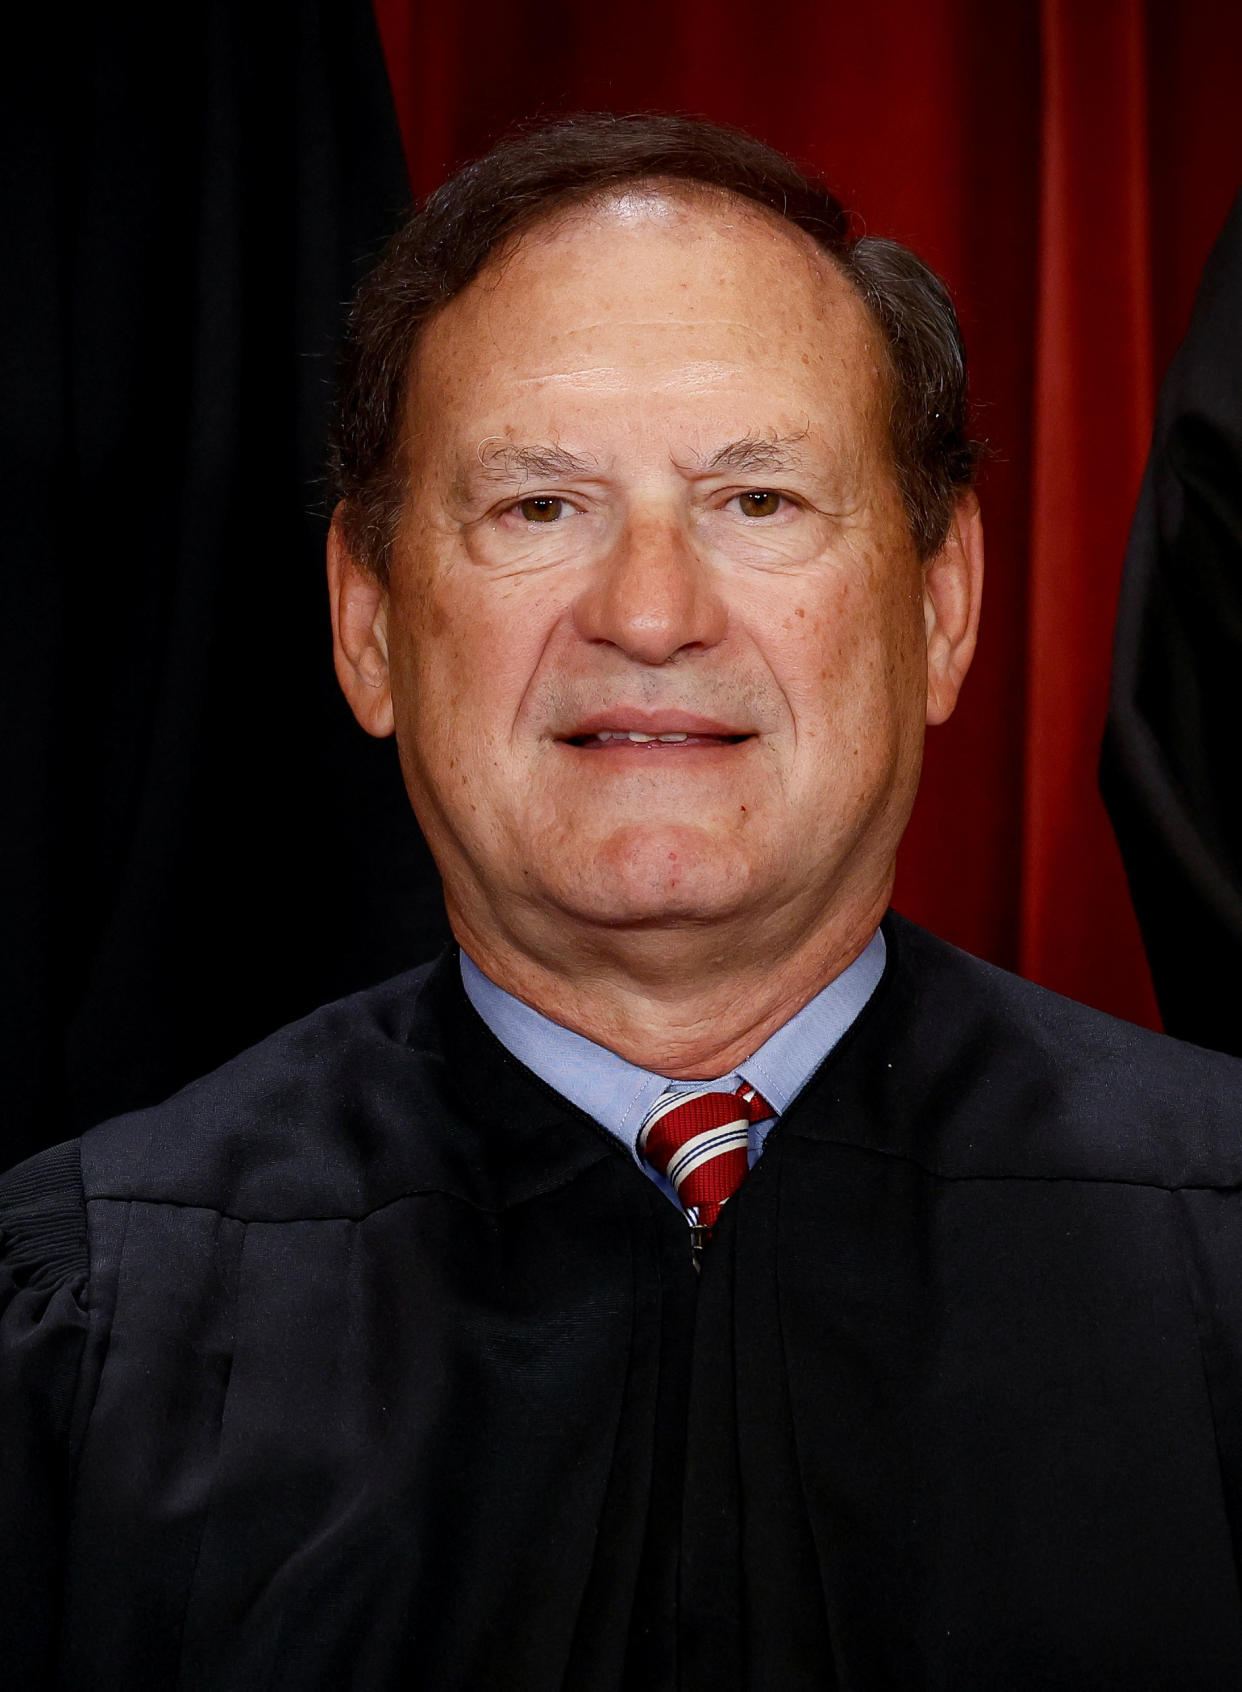 Justice Samuel Alito. (Evelyn Hockstein/Reuters)